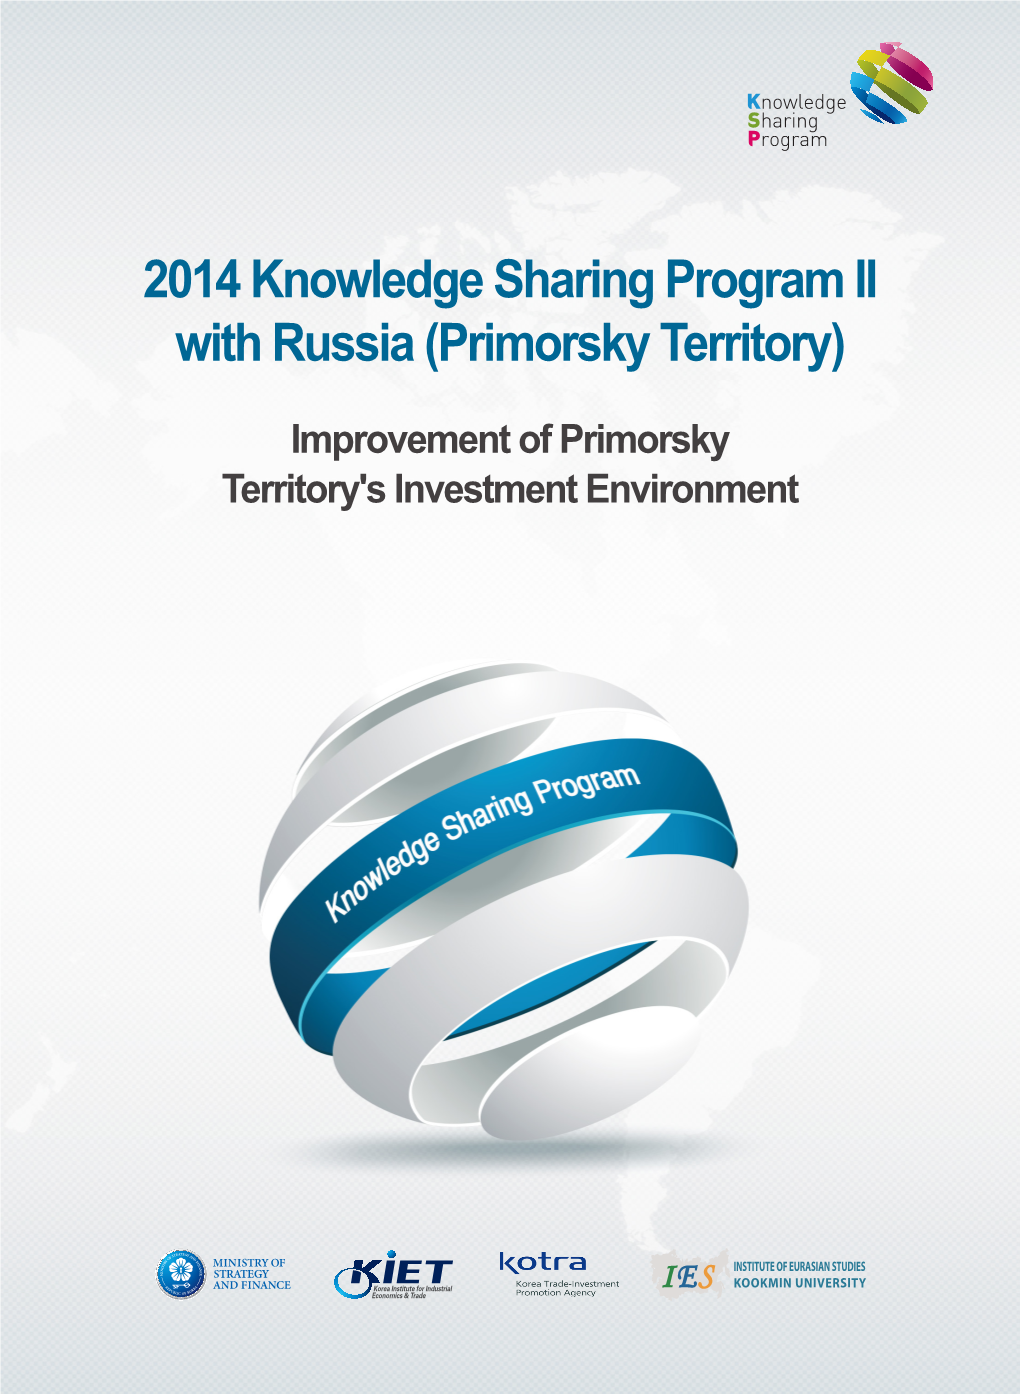 2014 Knowledge Sharing Program II with Russia (Primorsky Territory) 2014 Knowledge Sharing Program II with Russia (Primorsky Territory)